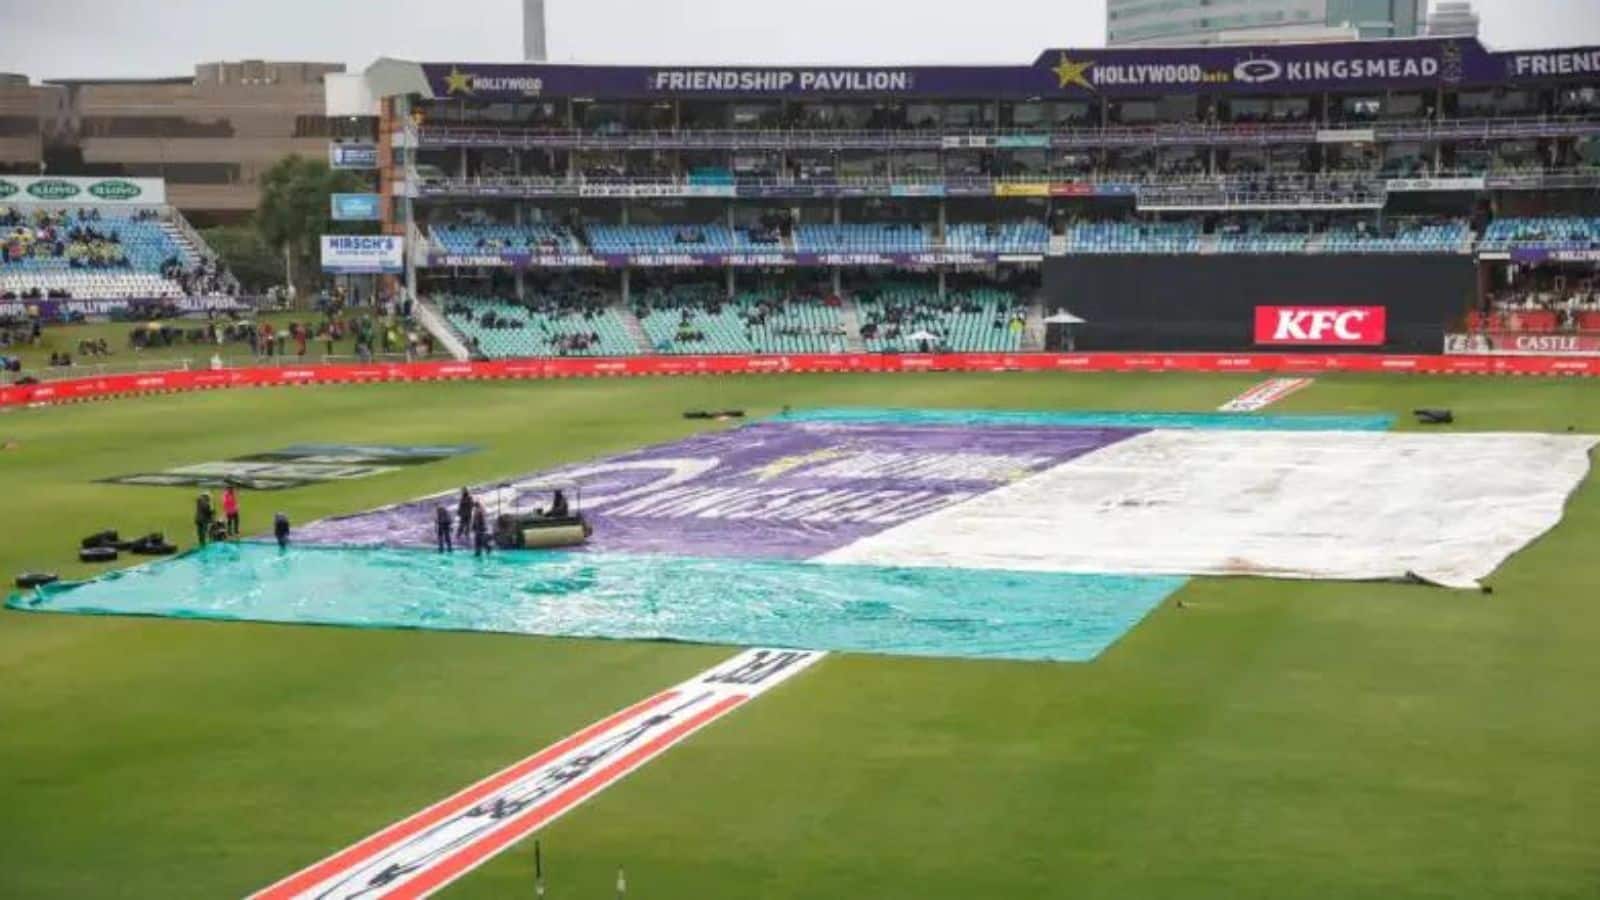 Rain 'Likely' To Play Spoilsport Again In SA-IND 2nd T20I - Reports